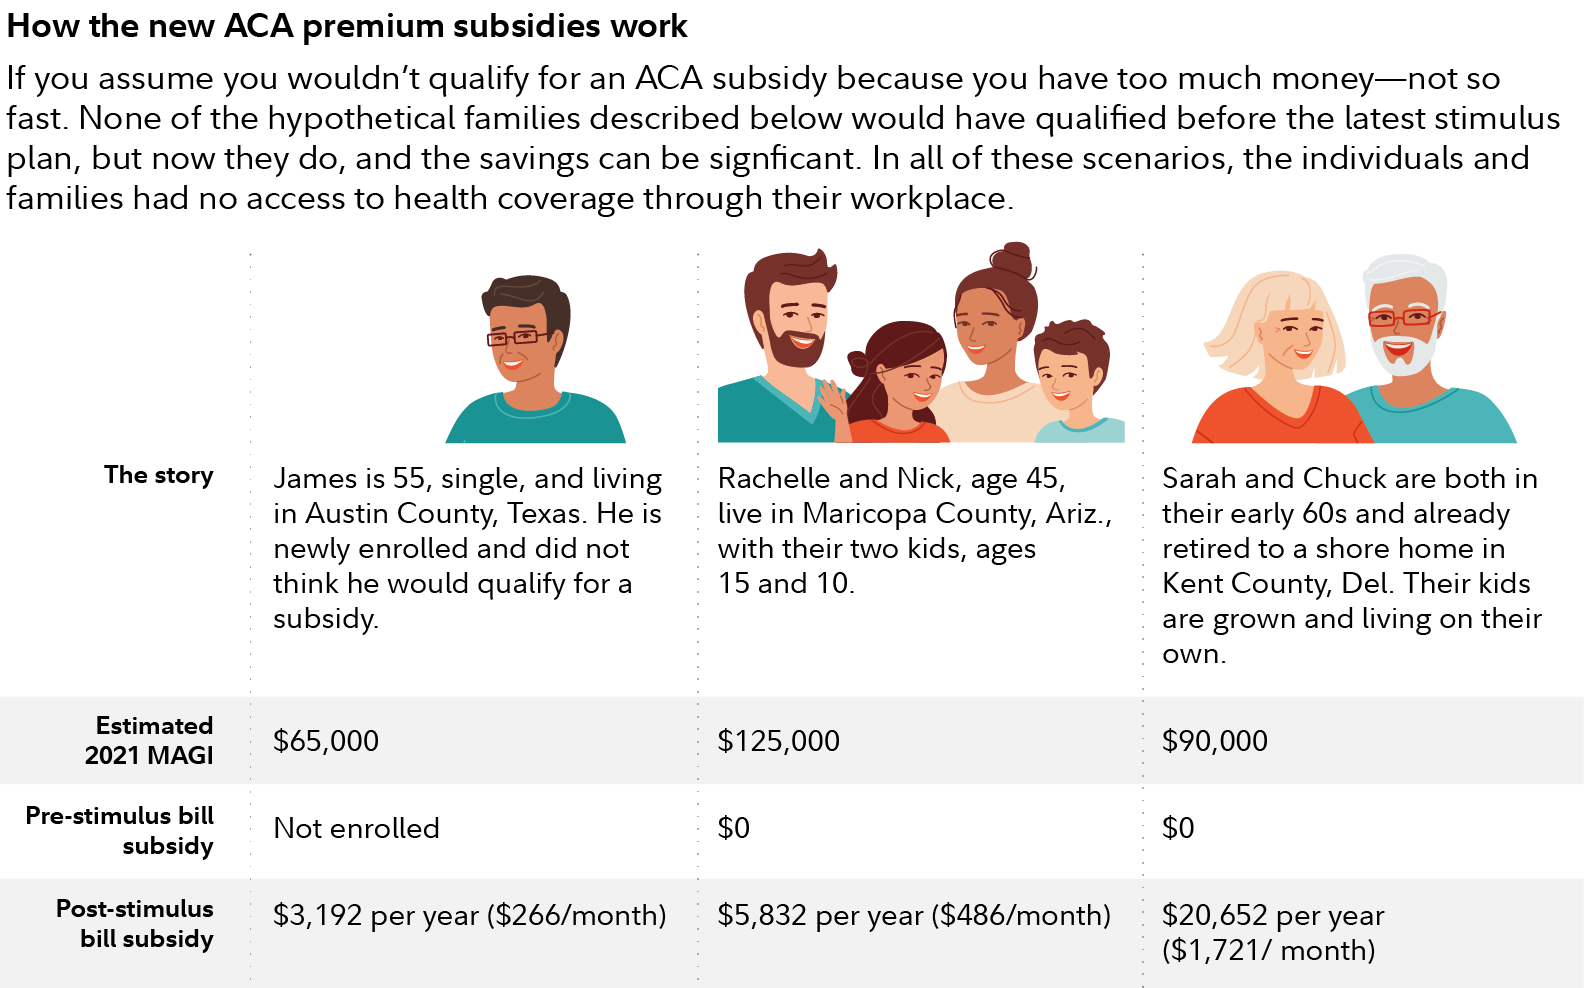 Graphic shows 3 different examples of people receiving subsidies. A single man in Texas, age 55, receives $266 per month; a married couple with 2 children in Arizona receives $486 per month; and an older couple in their early sixties in Delaware receive $1,721 per month.